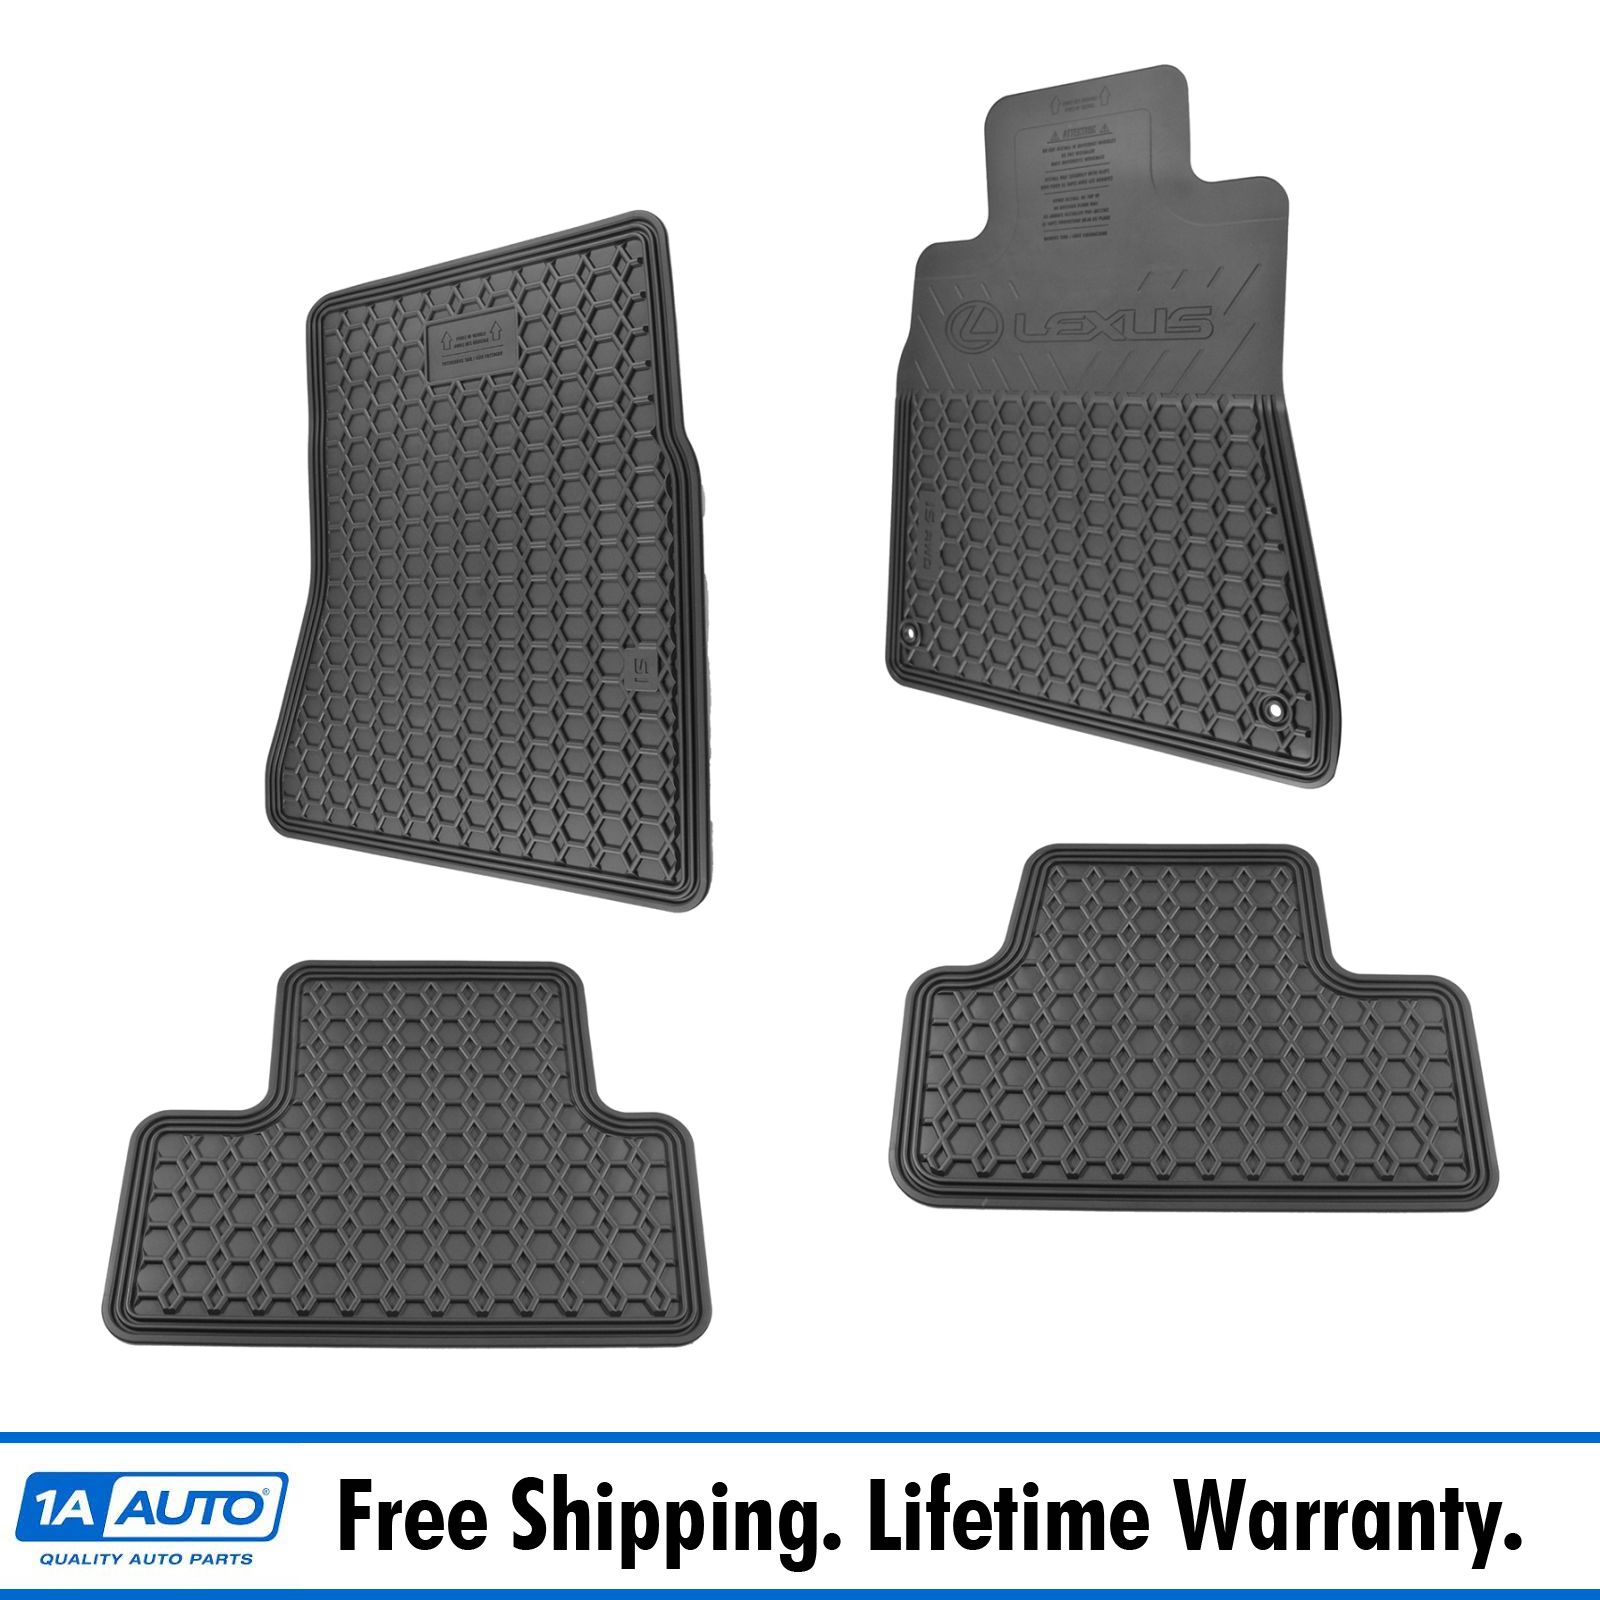 Oem All Weather Floor Mat Set Of 4 Black Molded Rubber For Rwd